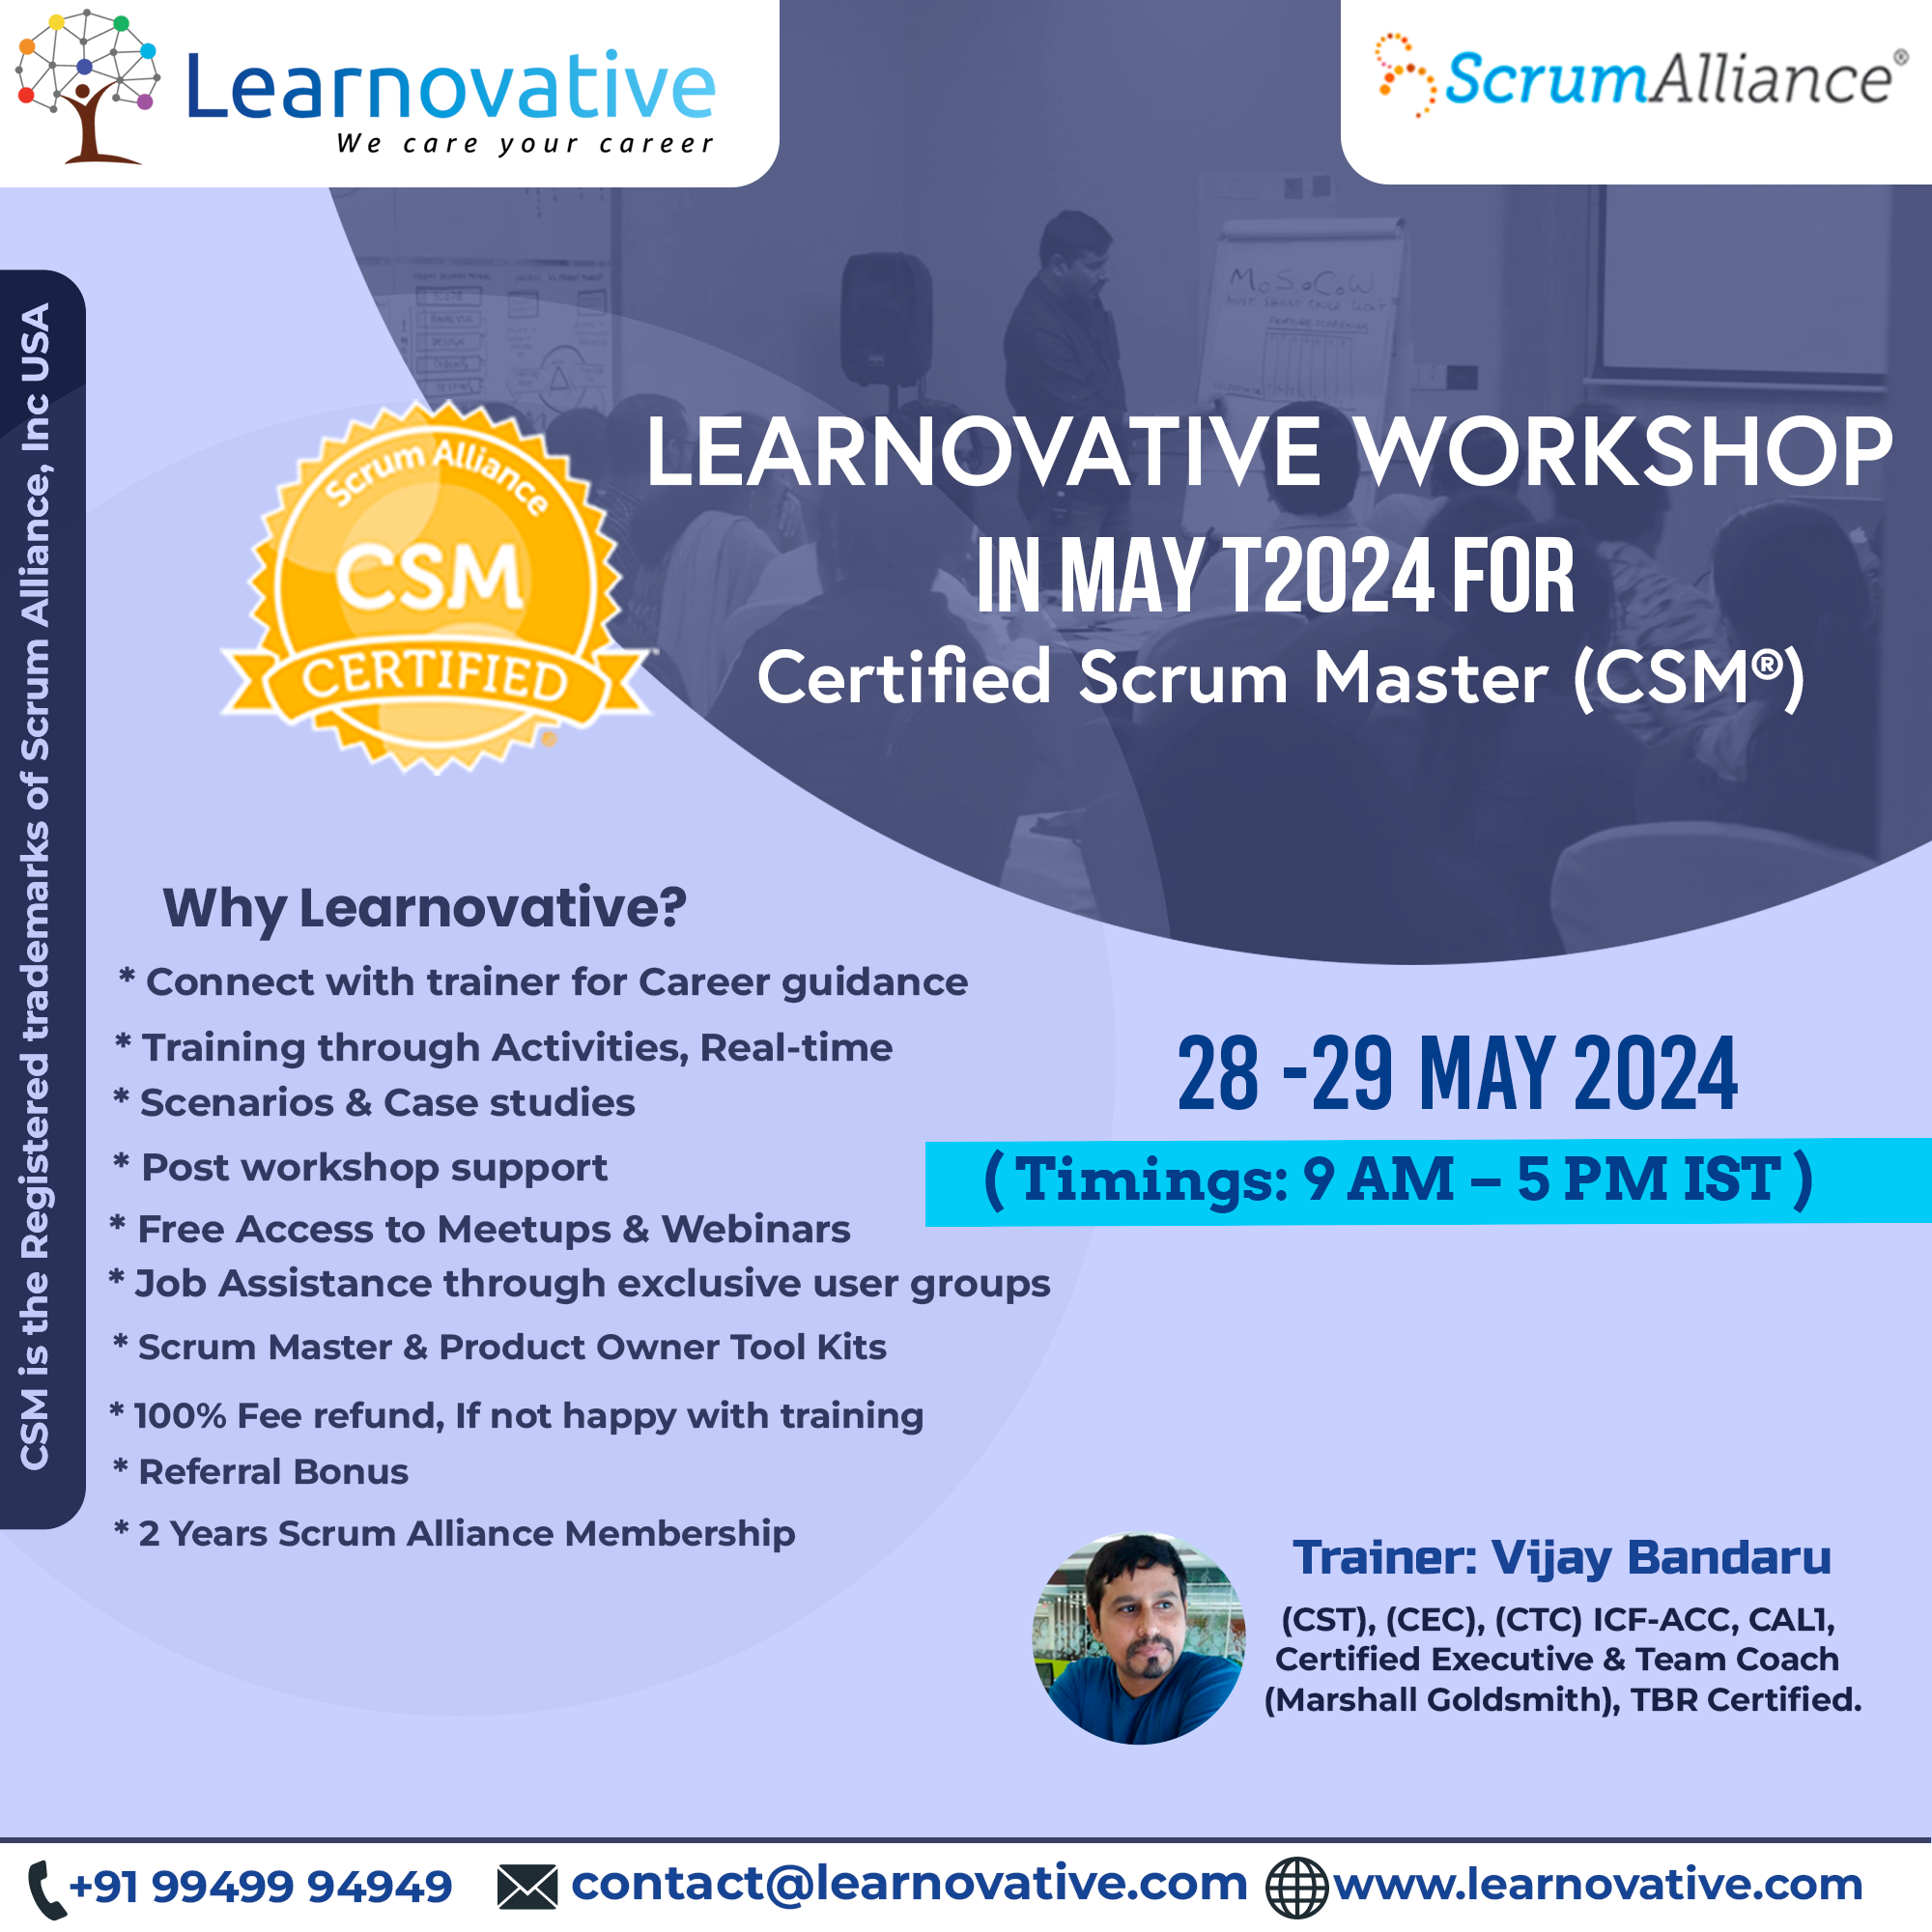 Certified Scrum Master (CSM) Certification | Live Virtual Classroom | 28-29 May 2024 | Learnovative, Online Event